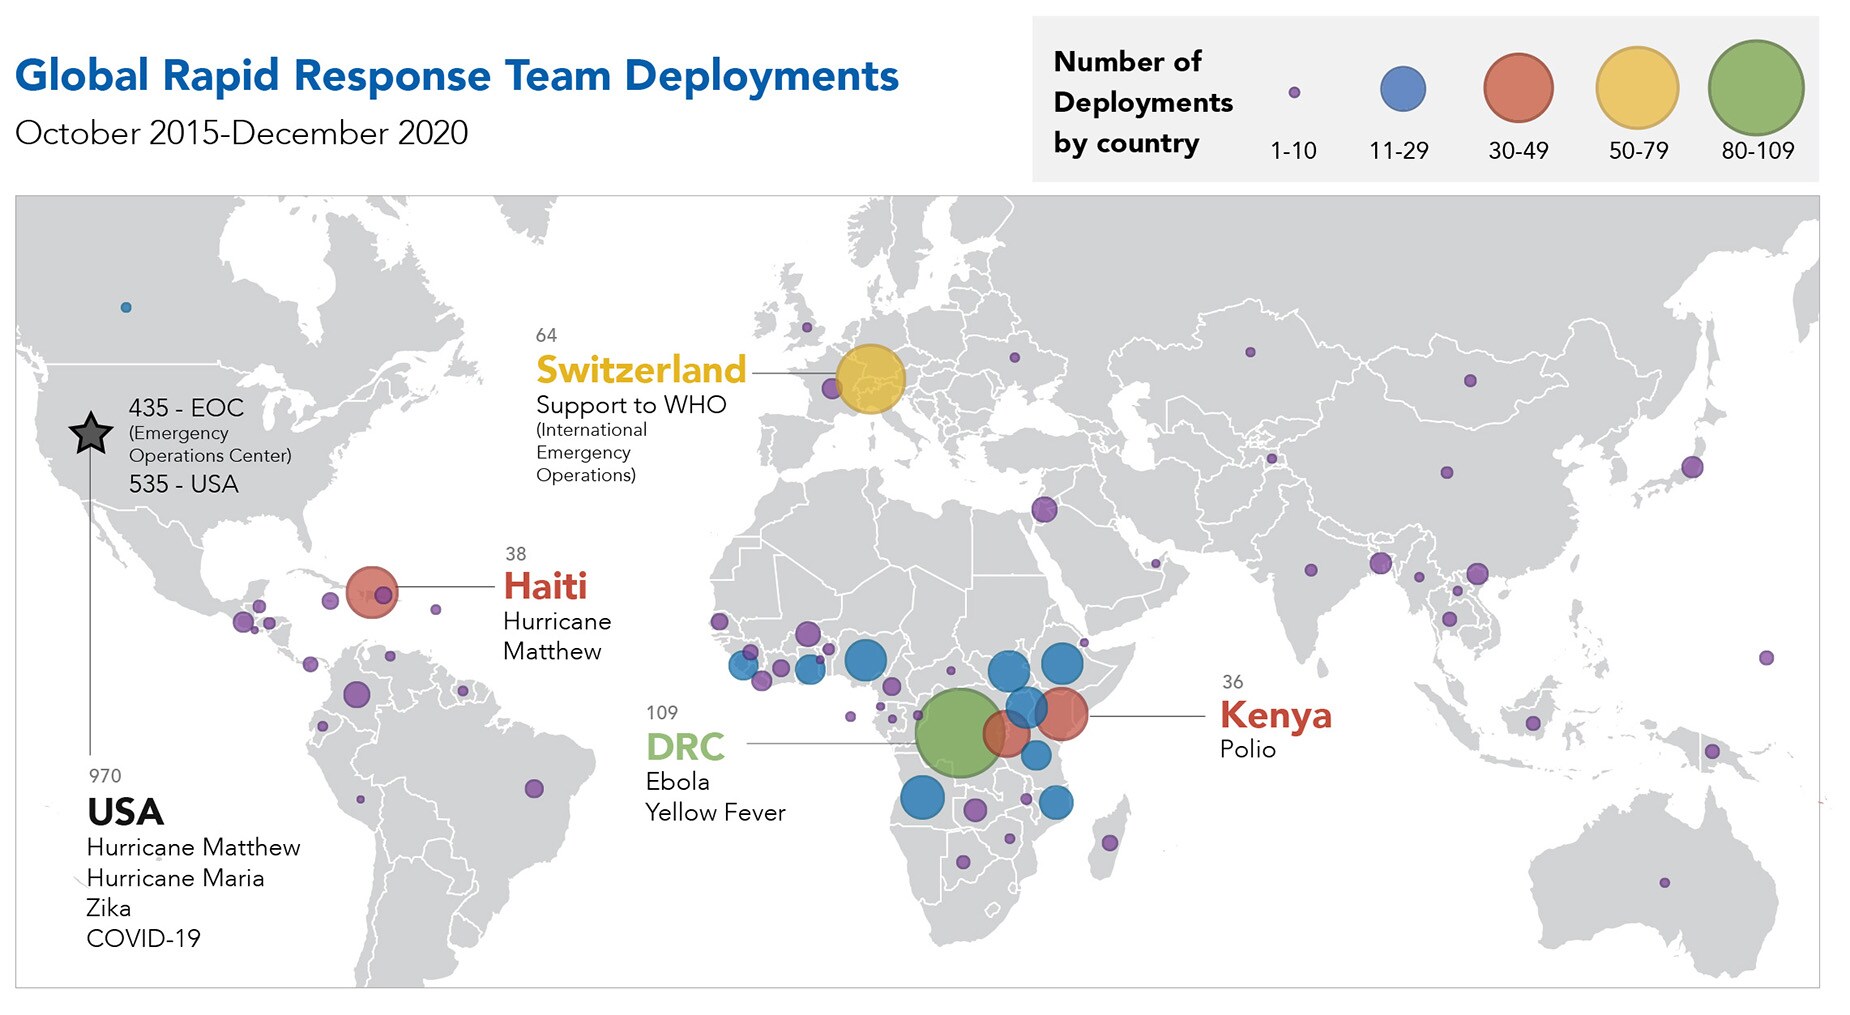 Global Rapid Response Team Deployments, October 2015-December 2020. Deployments are listed by country in the data table below the map.